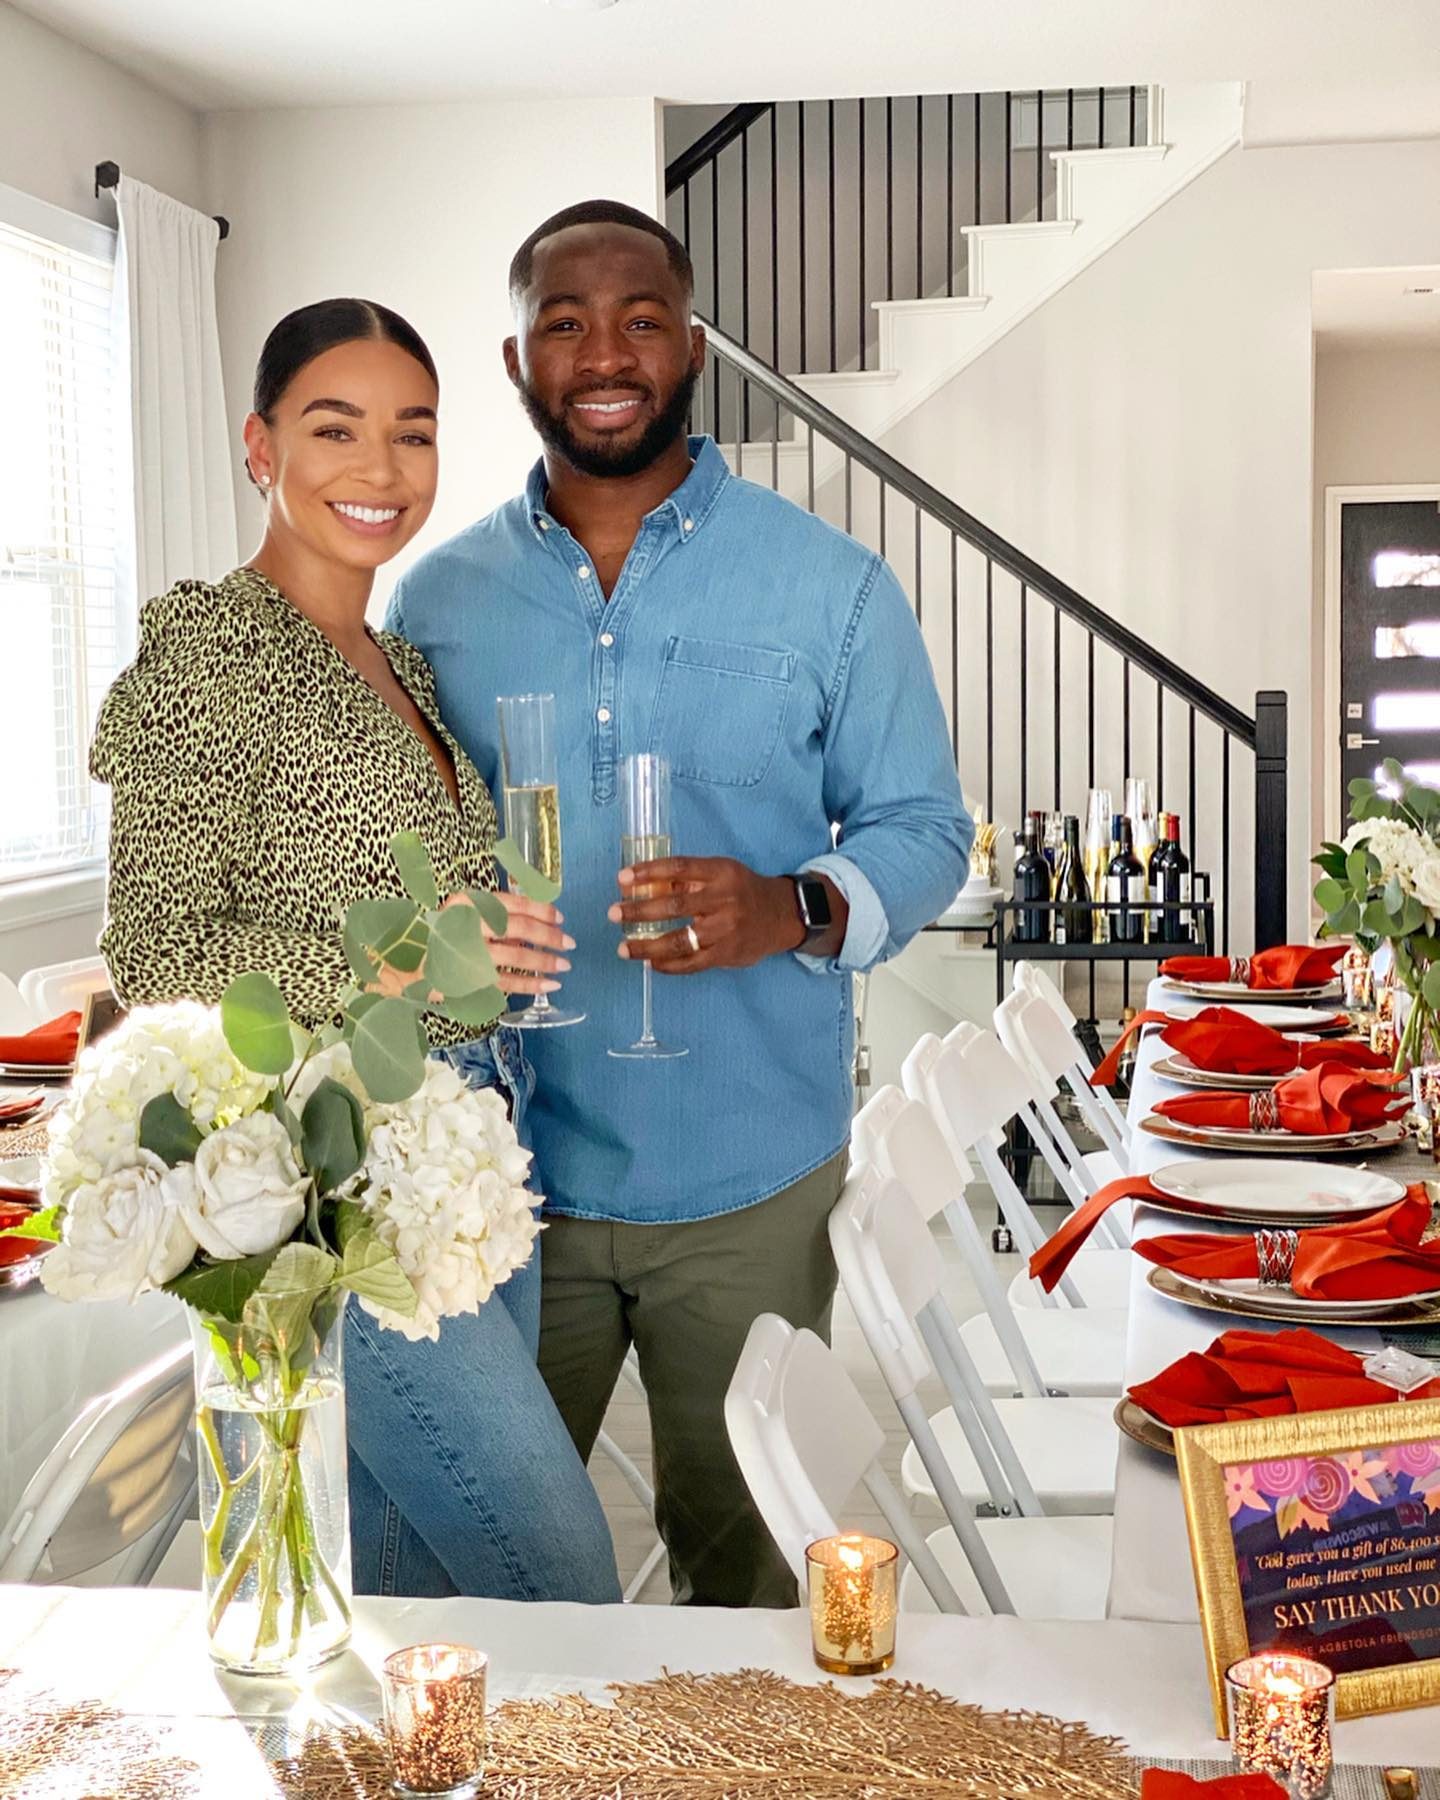 The Agbetola Friendsgiving Decor and Details